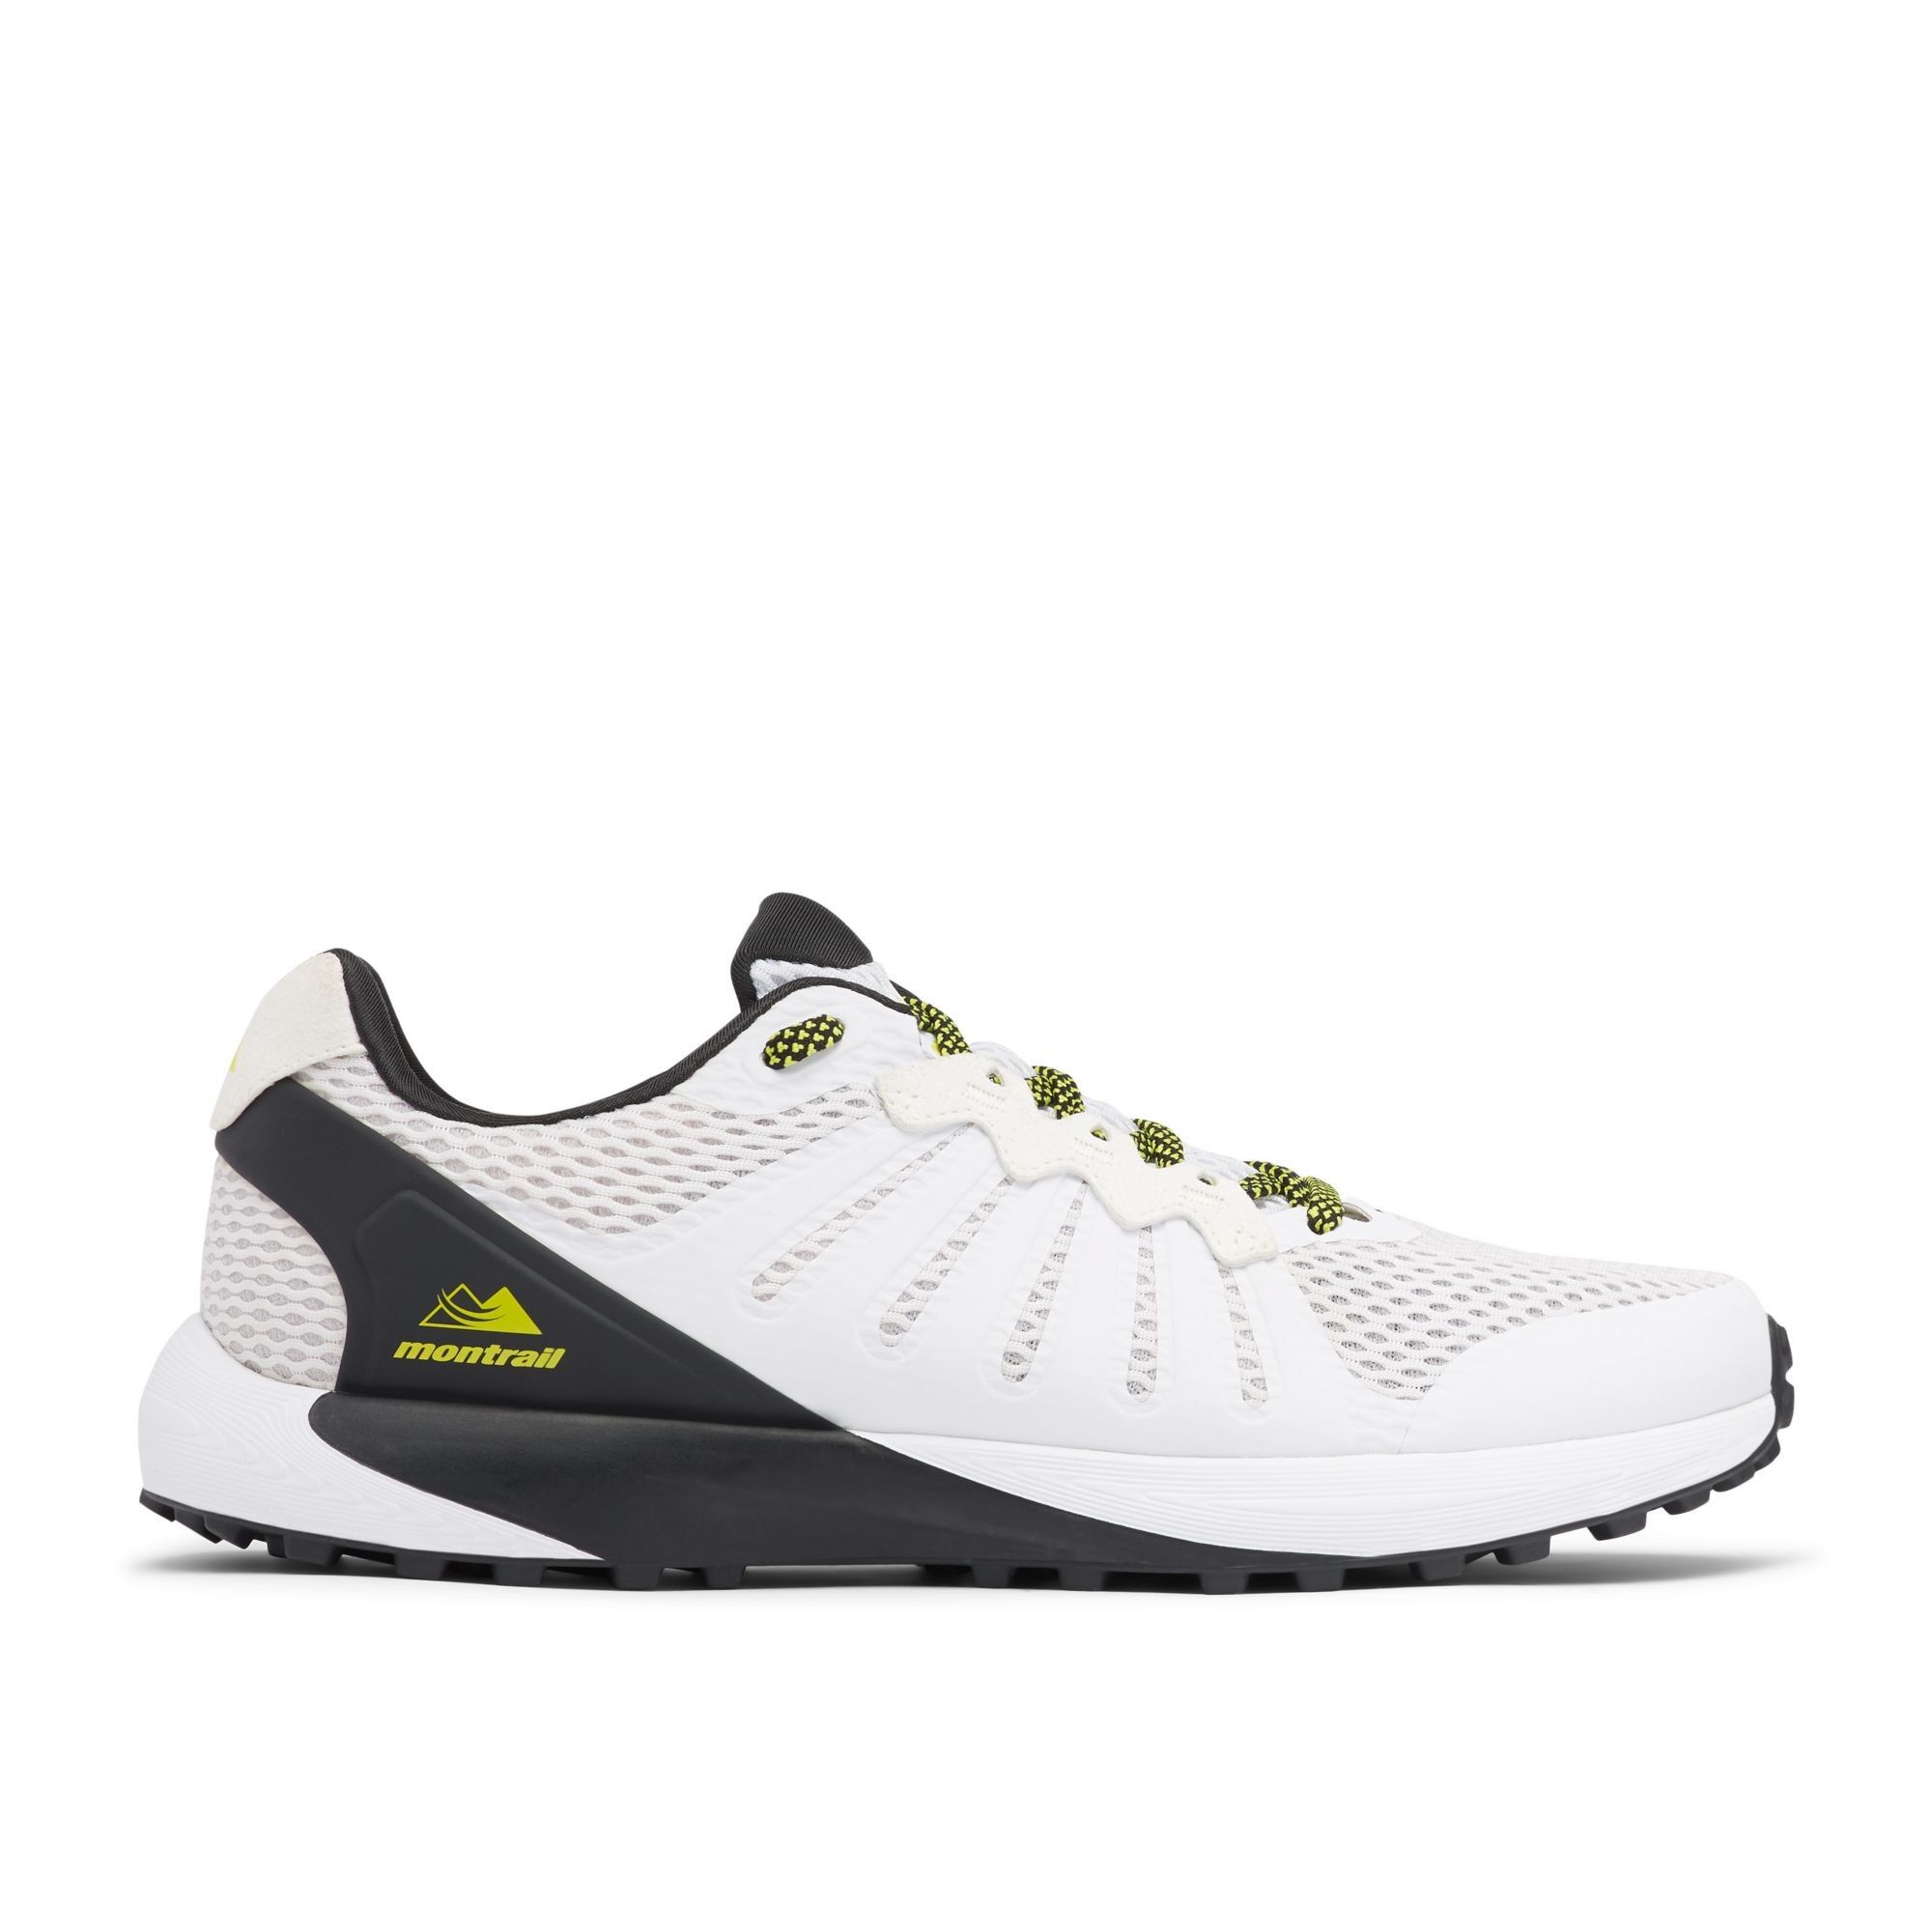 Columbia Montrail F.K.T. - Trail running shoes - Men's